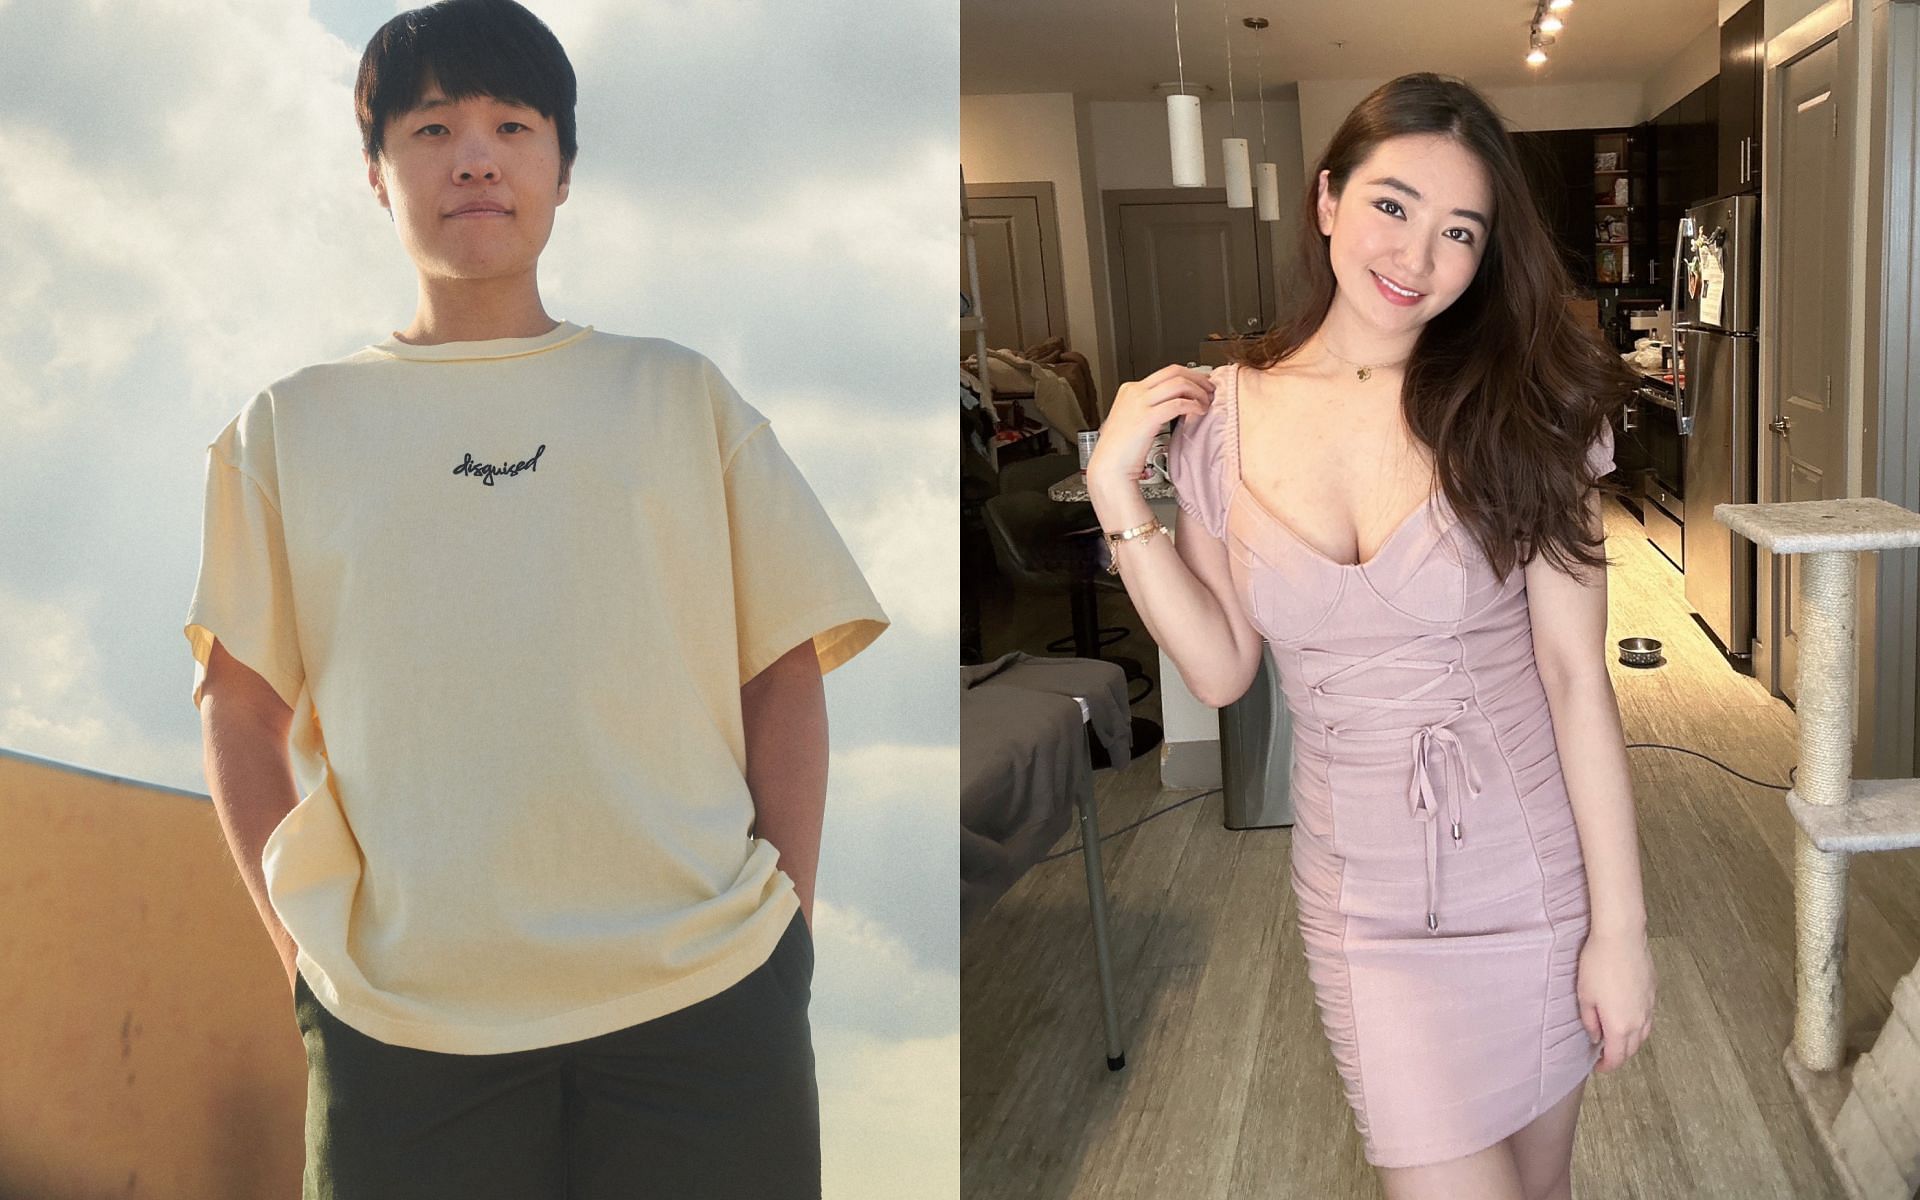 Disguised Toast reveals he will host dating show for Twitch streamer Emily Wang (Image via @DisguisedToast and @emilyywng/X)